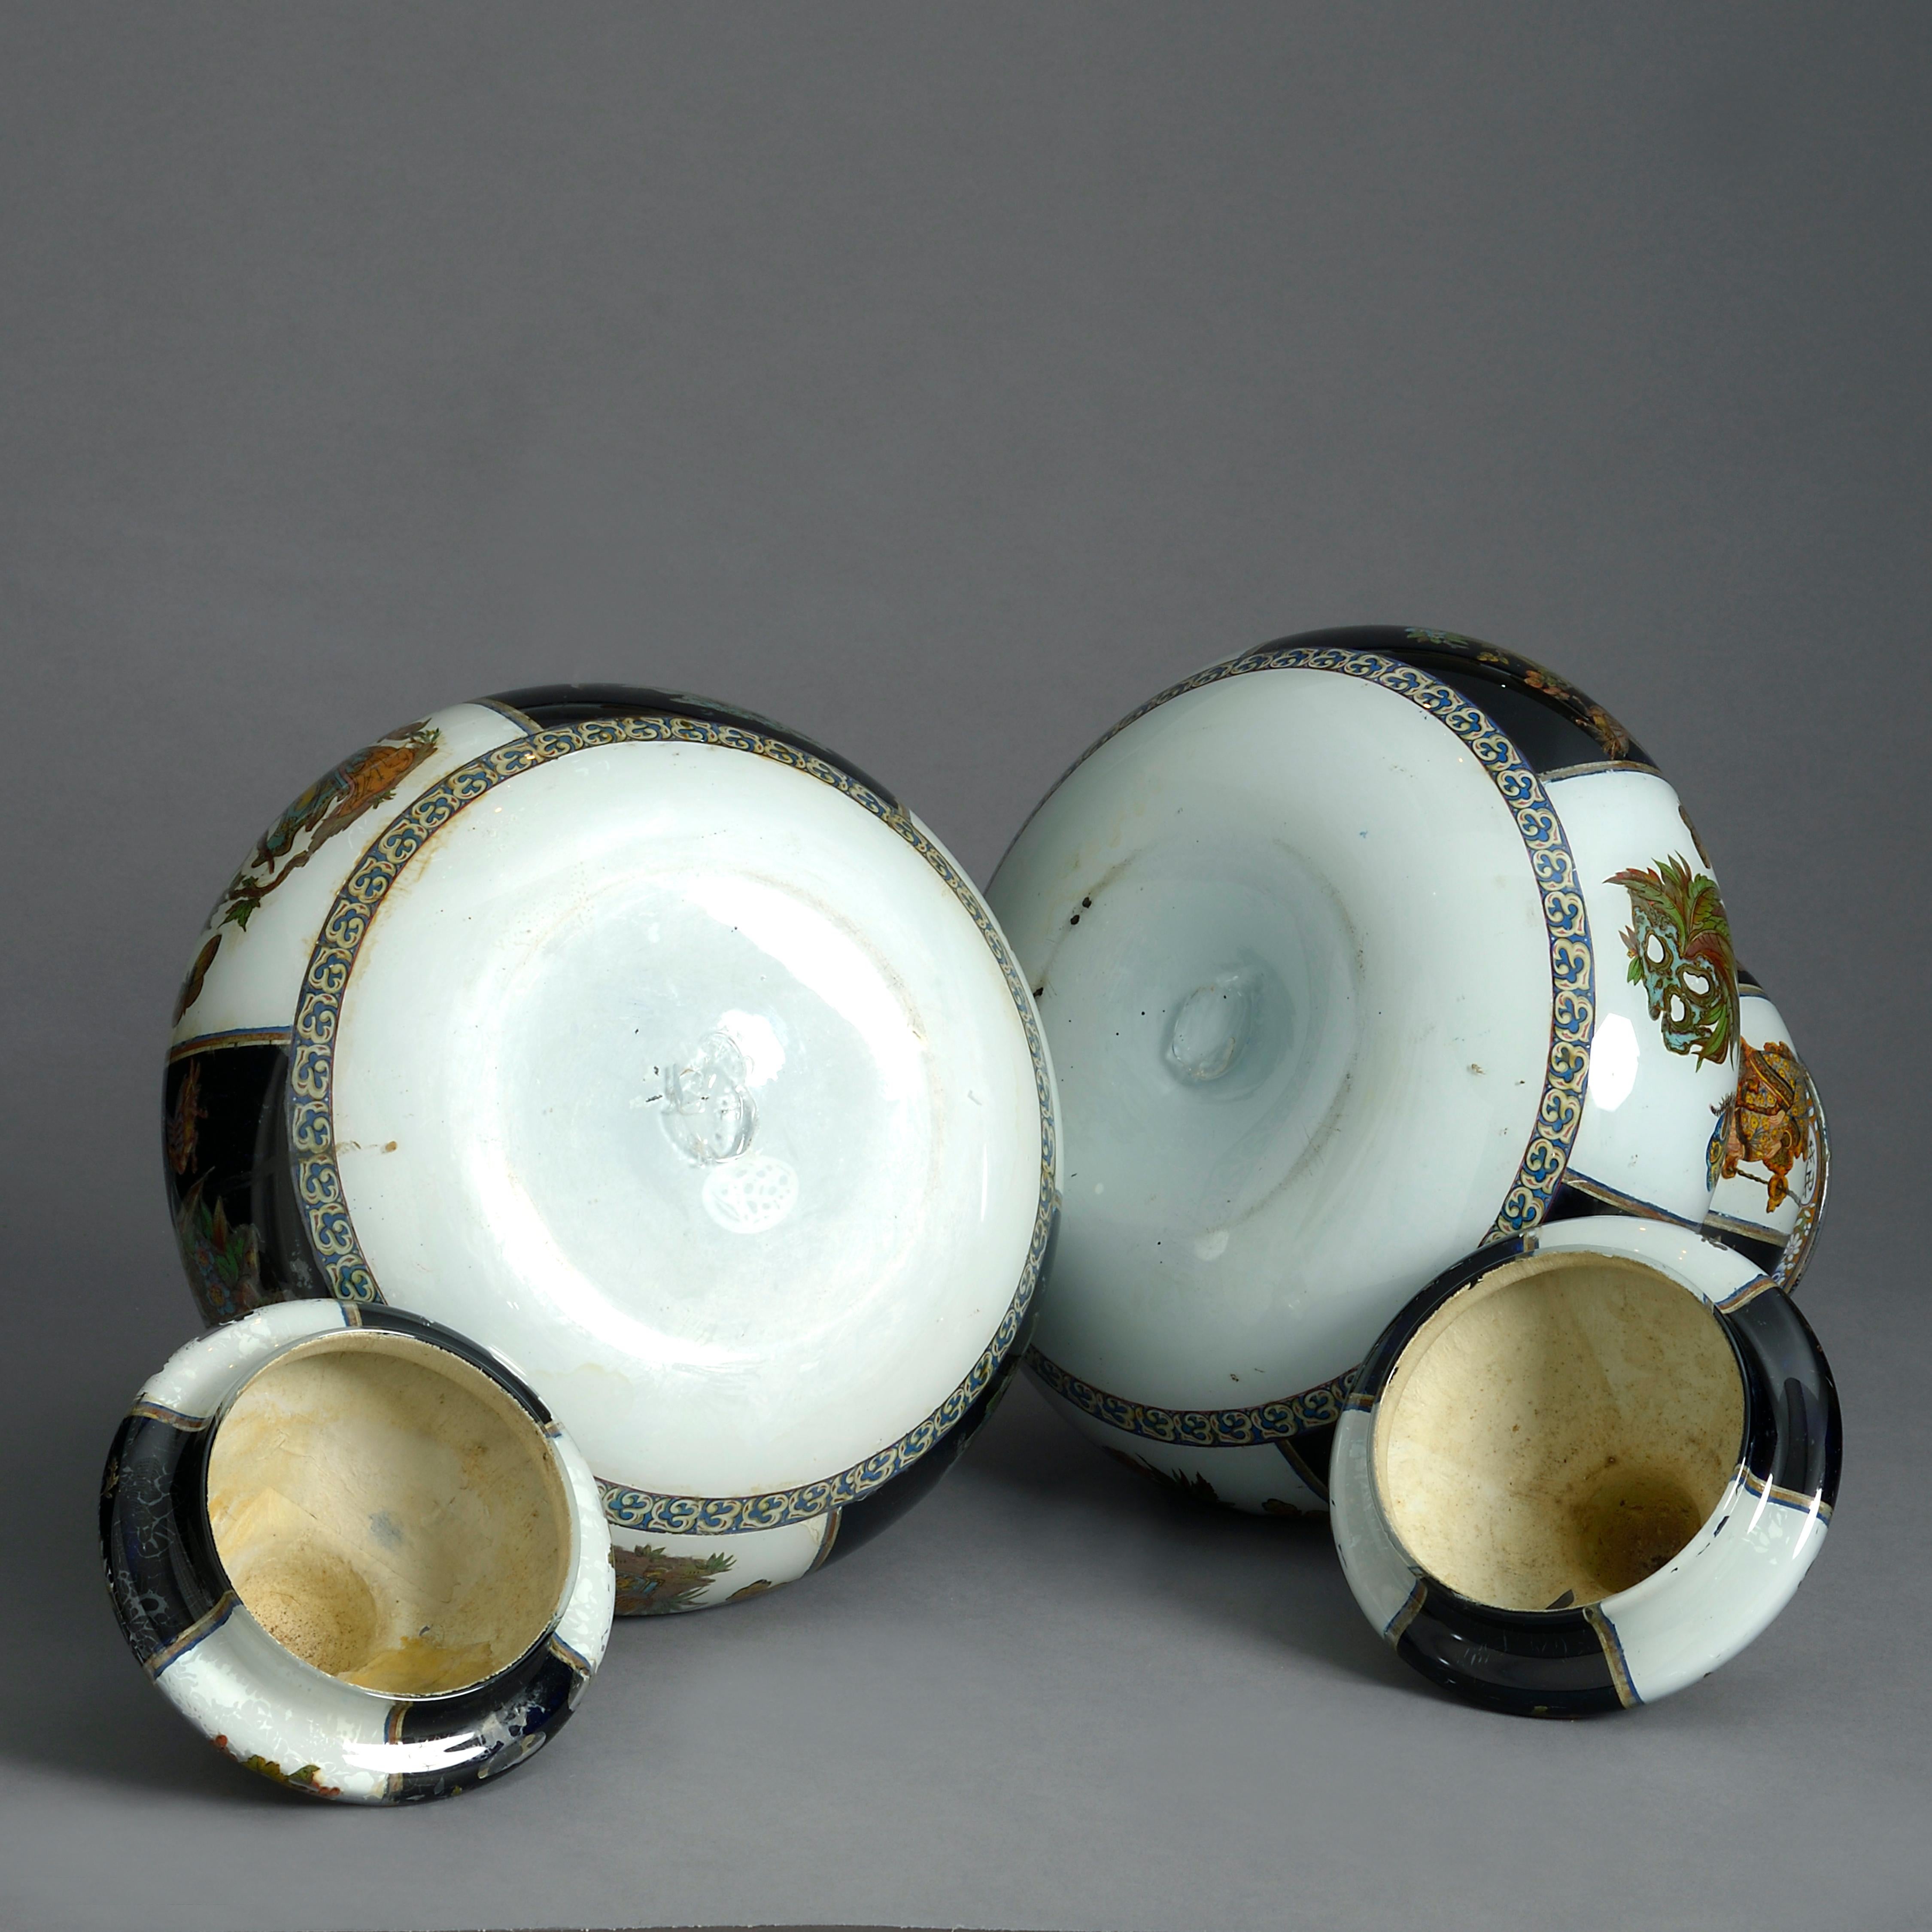 Chinese Export Large Pair of 19th Century Decalcomania Gourd Vases